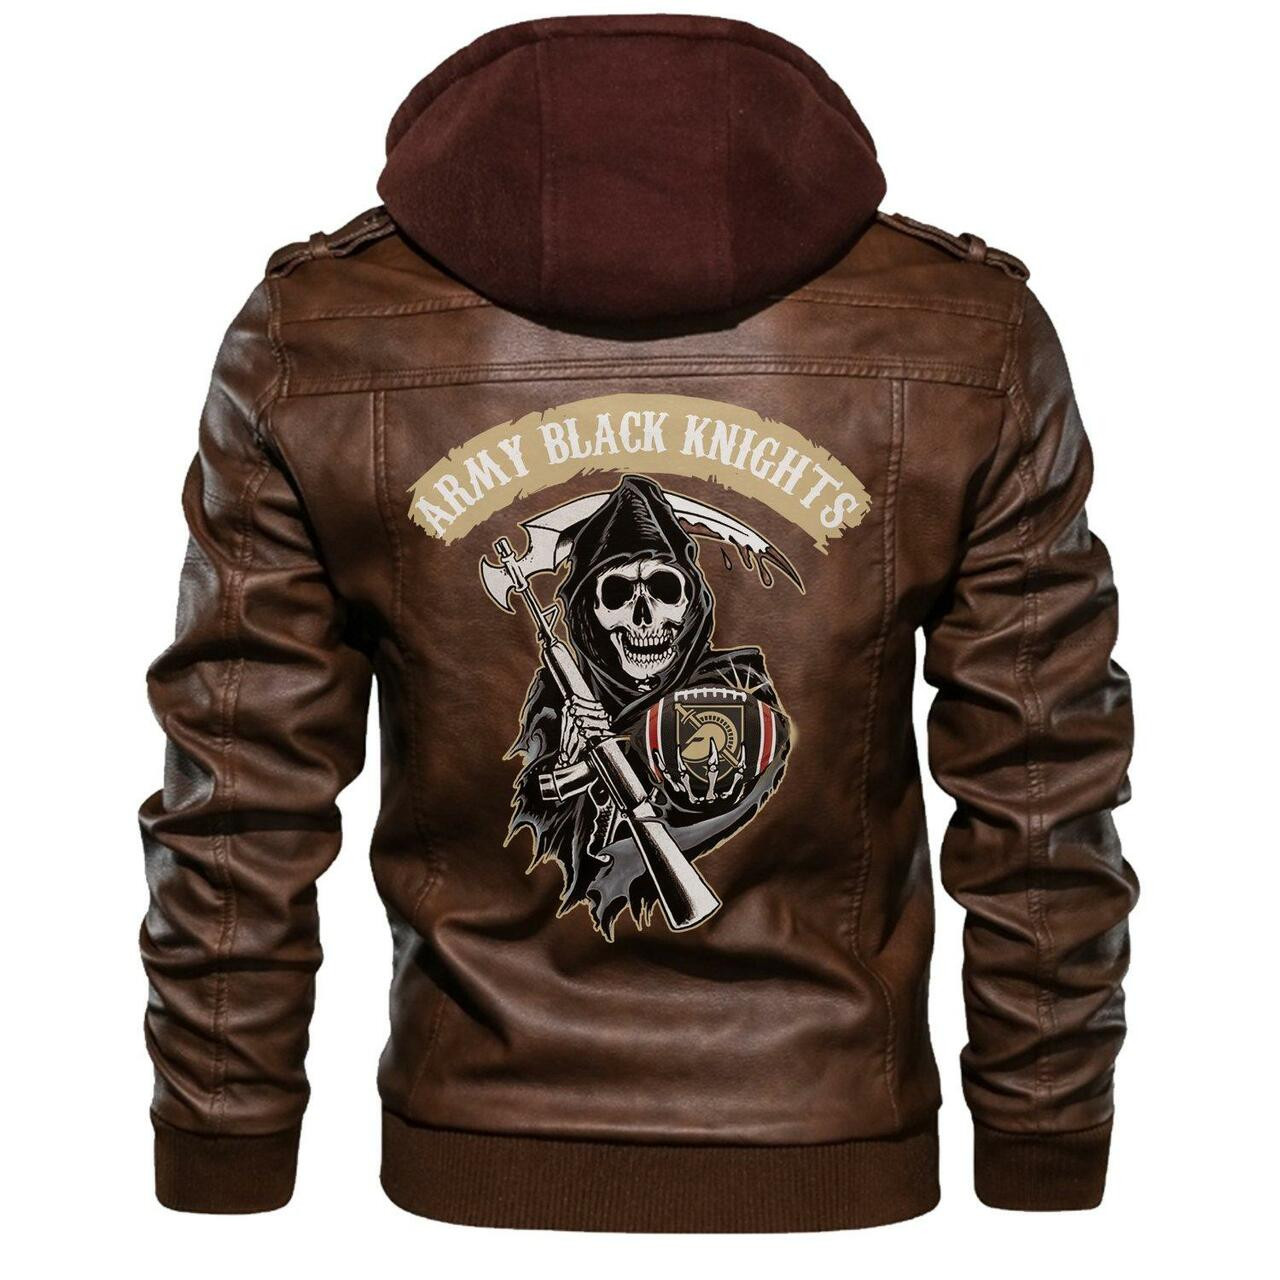 You can find Leather Jacket online at a great price 9